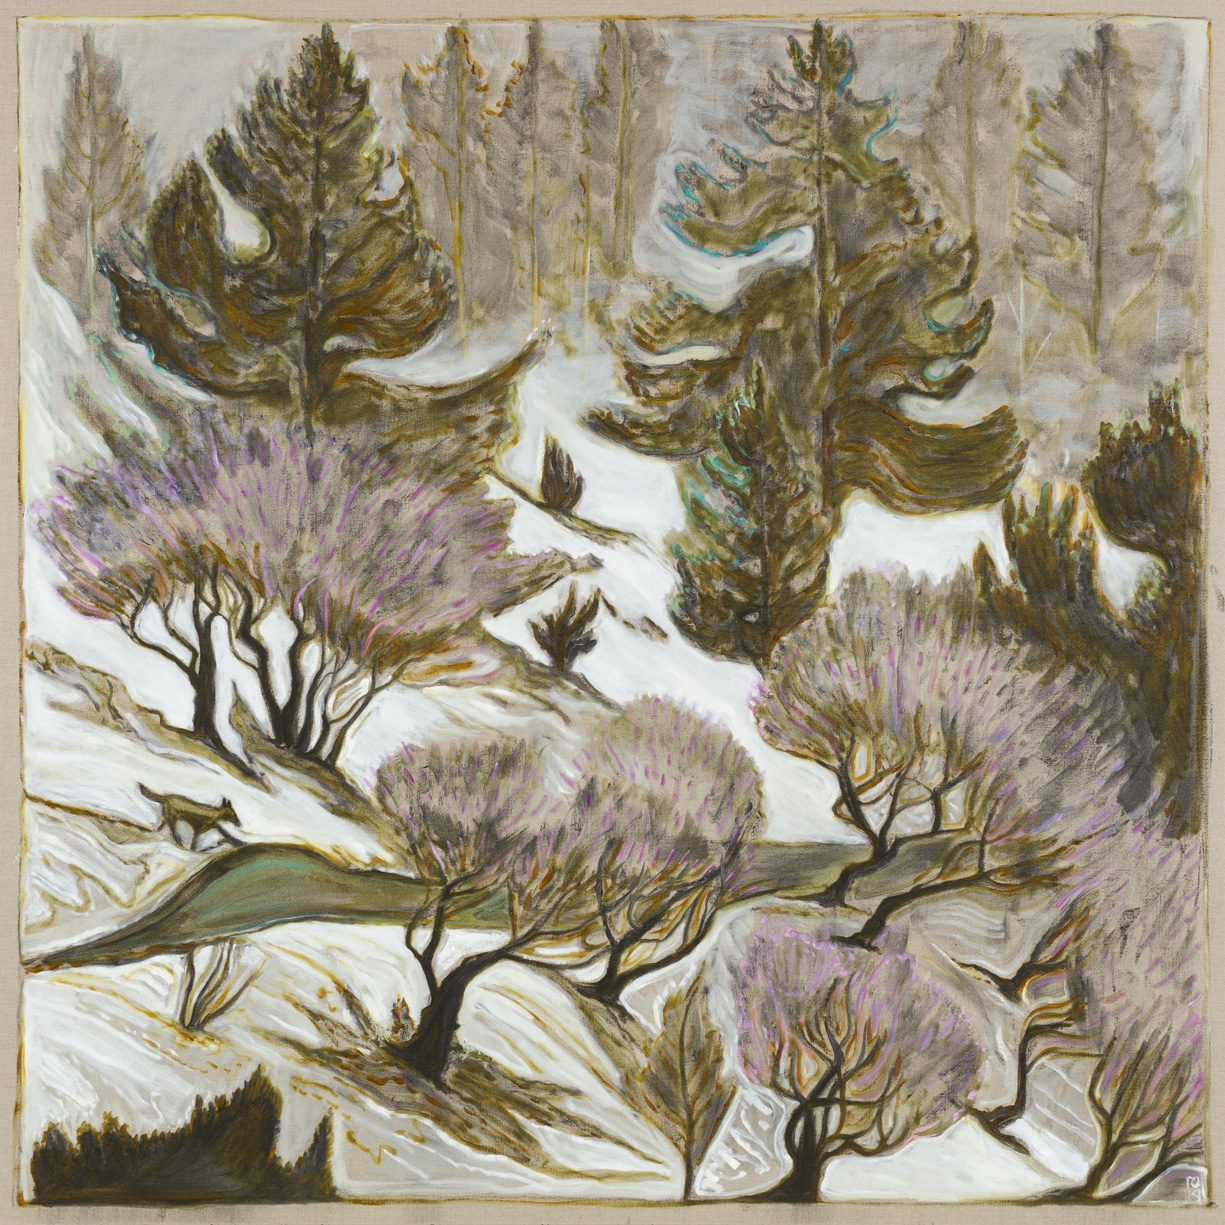 BILLY CHILDISH, wolf, trees and road, 2019